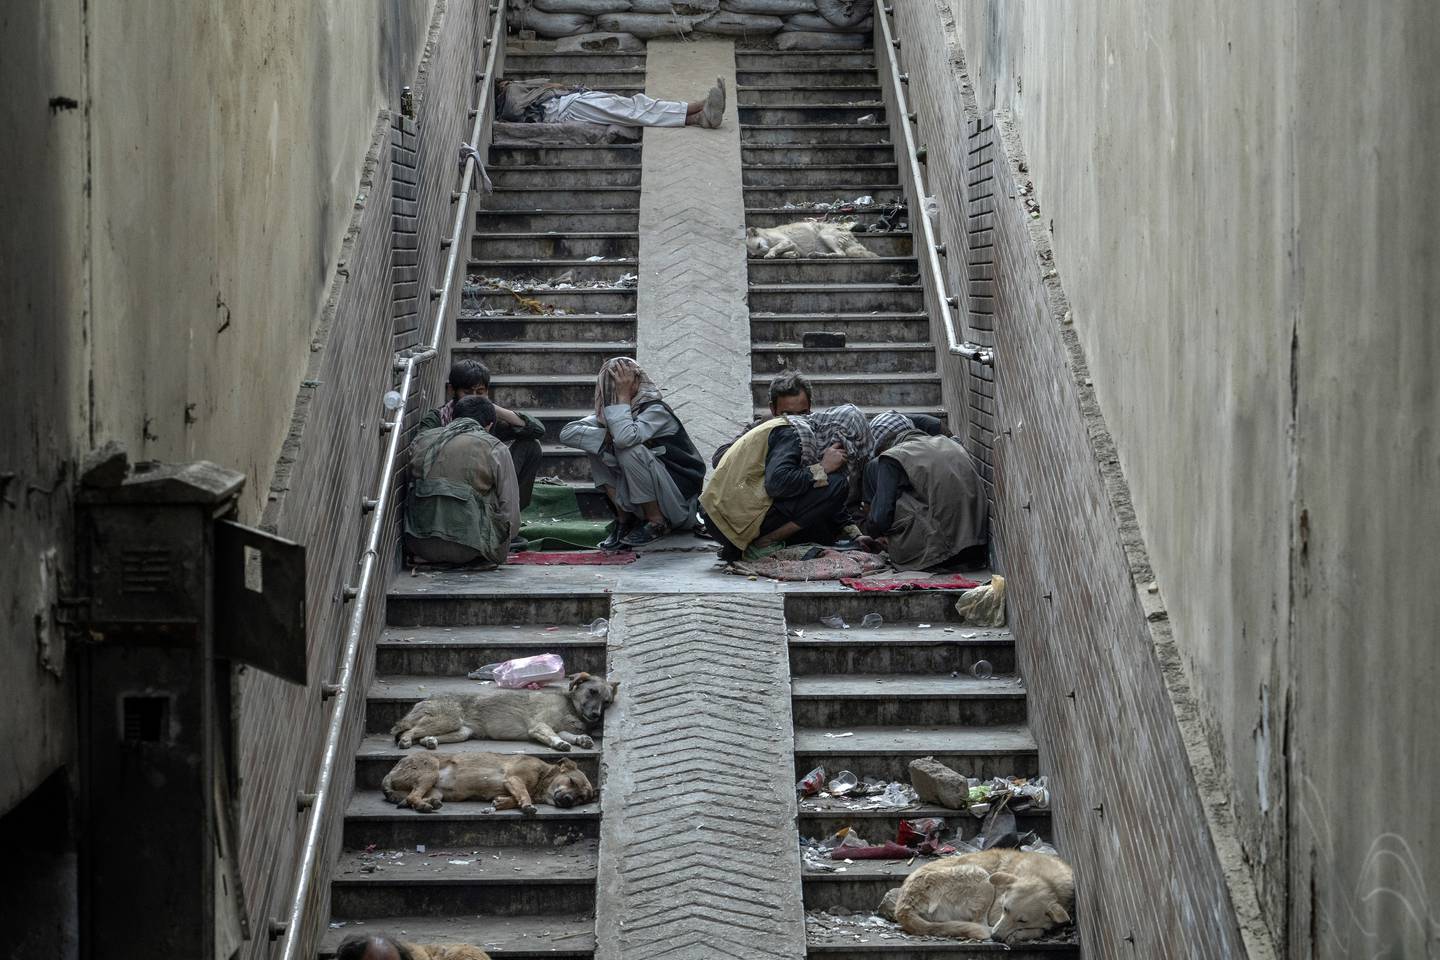 Afghans drug addicts gather under a bridge to smoke heroin, as the addicted and hungover dogs have fallen on the ground, in the city of Kabul, Afghanistan, Tuesday, June 7, 2022. Drug addiction has long been a problem in Afghanistan, the world’s biggest producer of opium and heroin. The ranks of the addicted have been fueled by persistent poverty and by decades of war that left few families unscarred. (AP Photo/Ebrahim Noroozi)